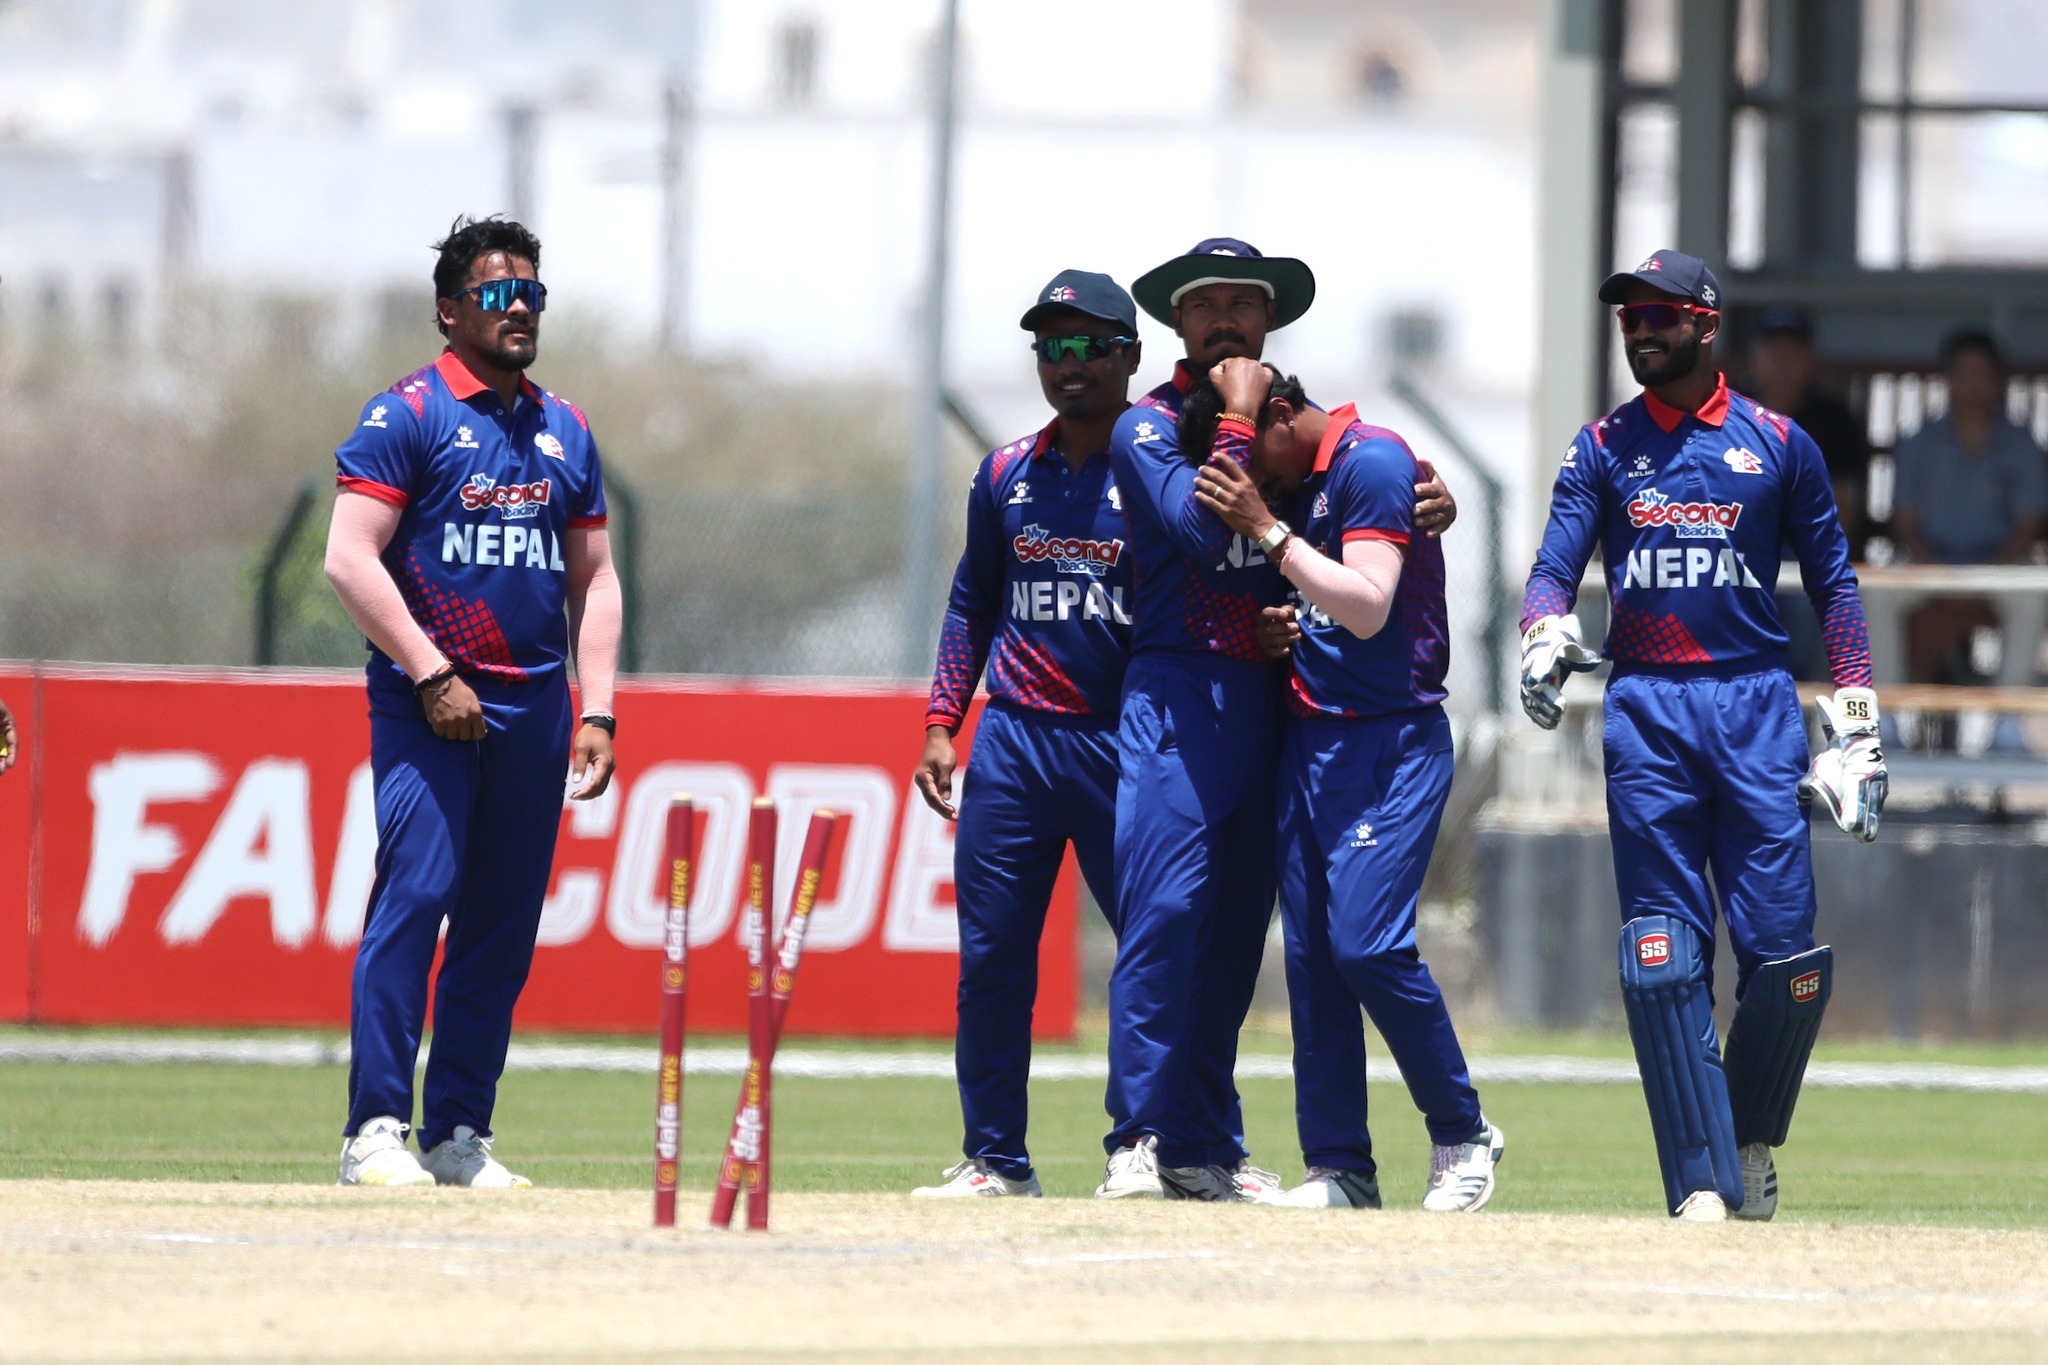 Nepal lost to UAE, failed to qualify for Asia Cup